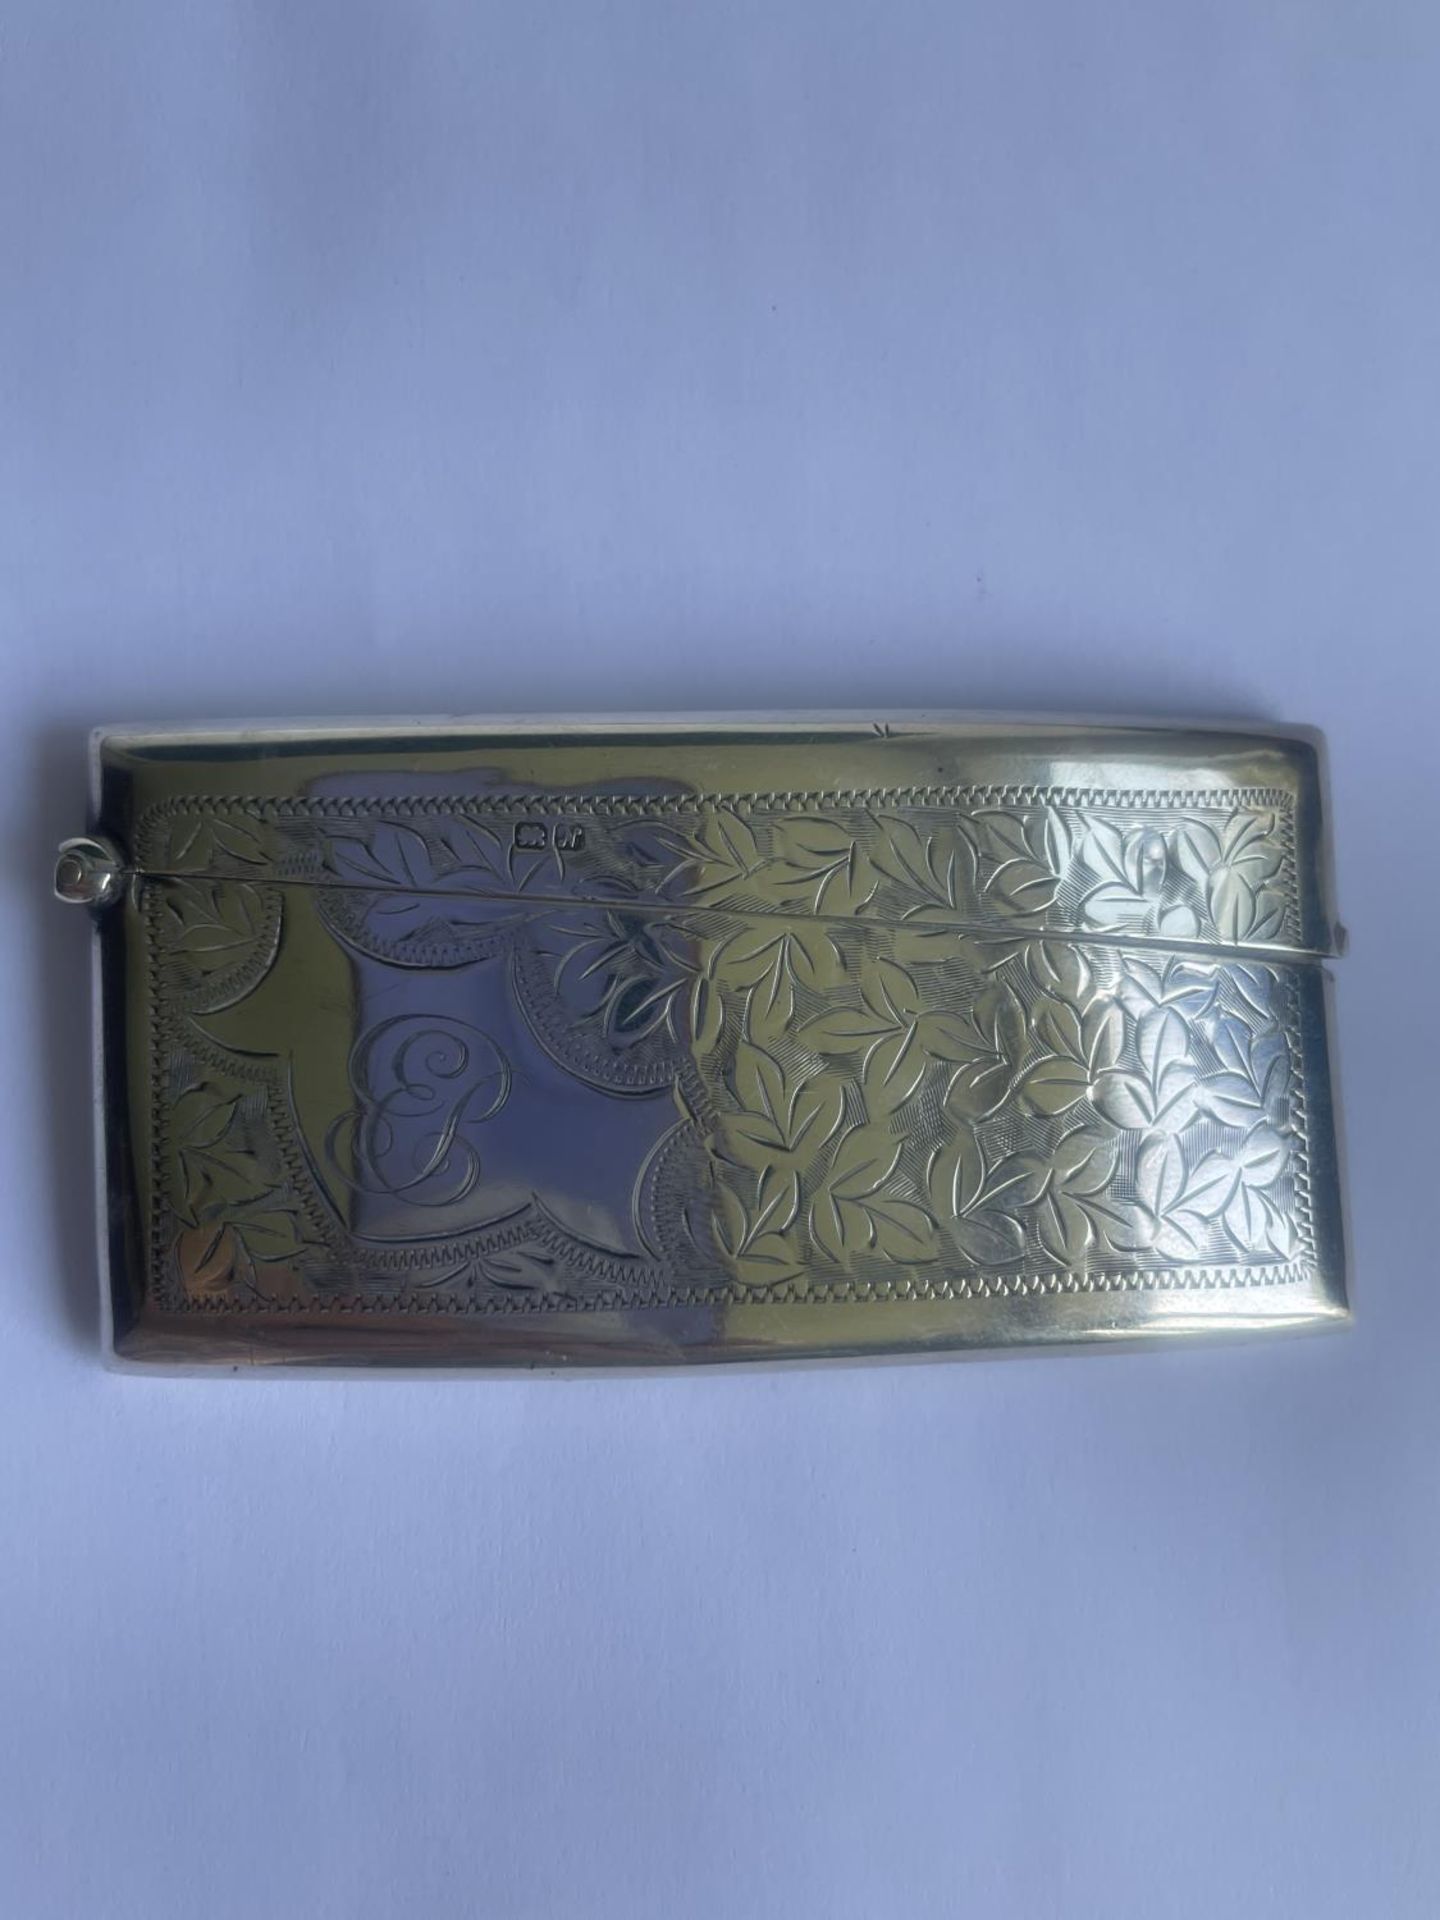 A HALLMARKED CHESTER SILVER CARD CASE GROSS WEIGHT 30 GRAMS